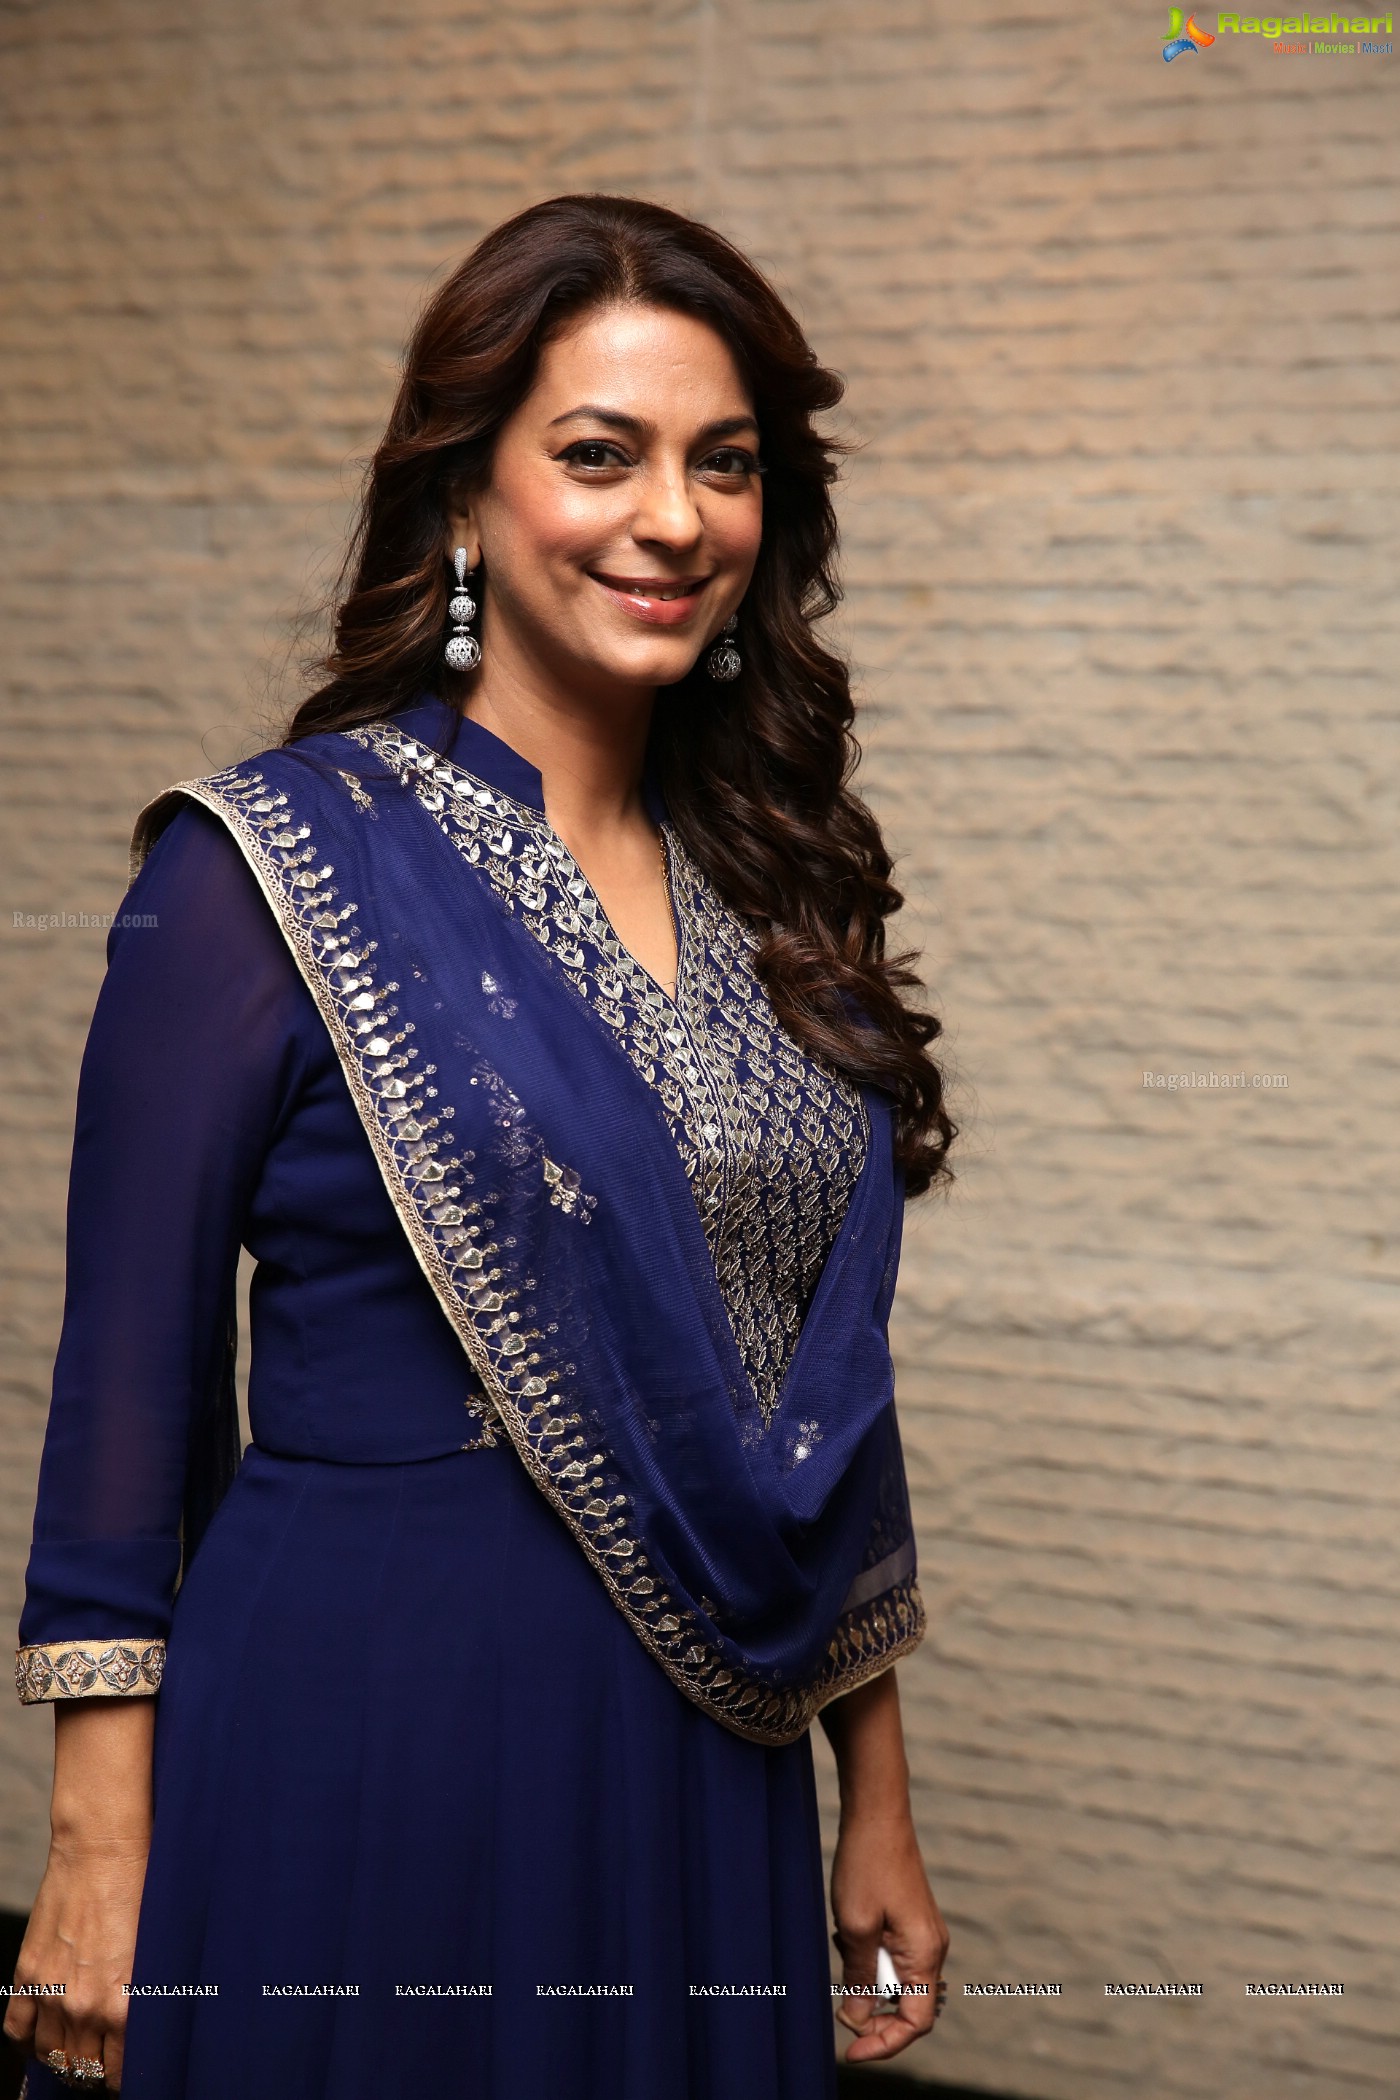 Juhi Chawla at Young FICCI Ladies Organization (YFLO) Event, Hyderabad (Posters)